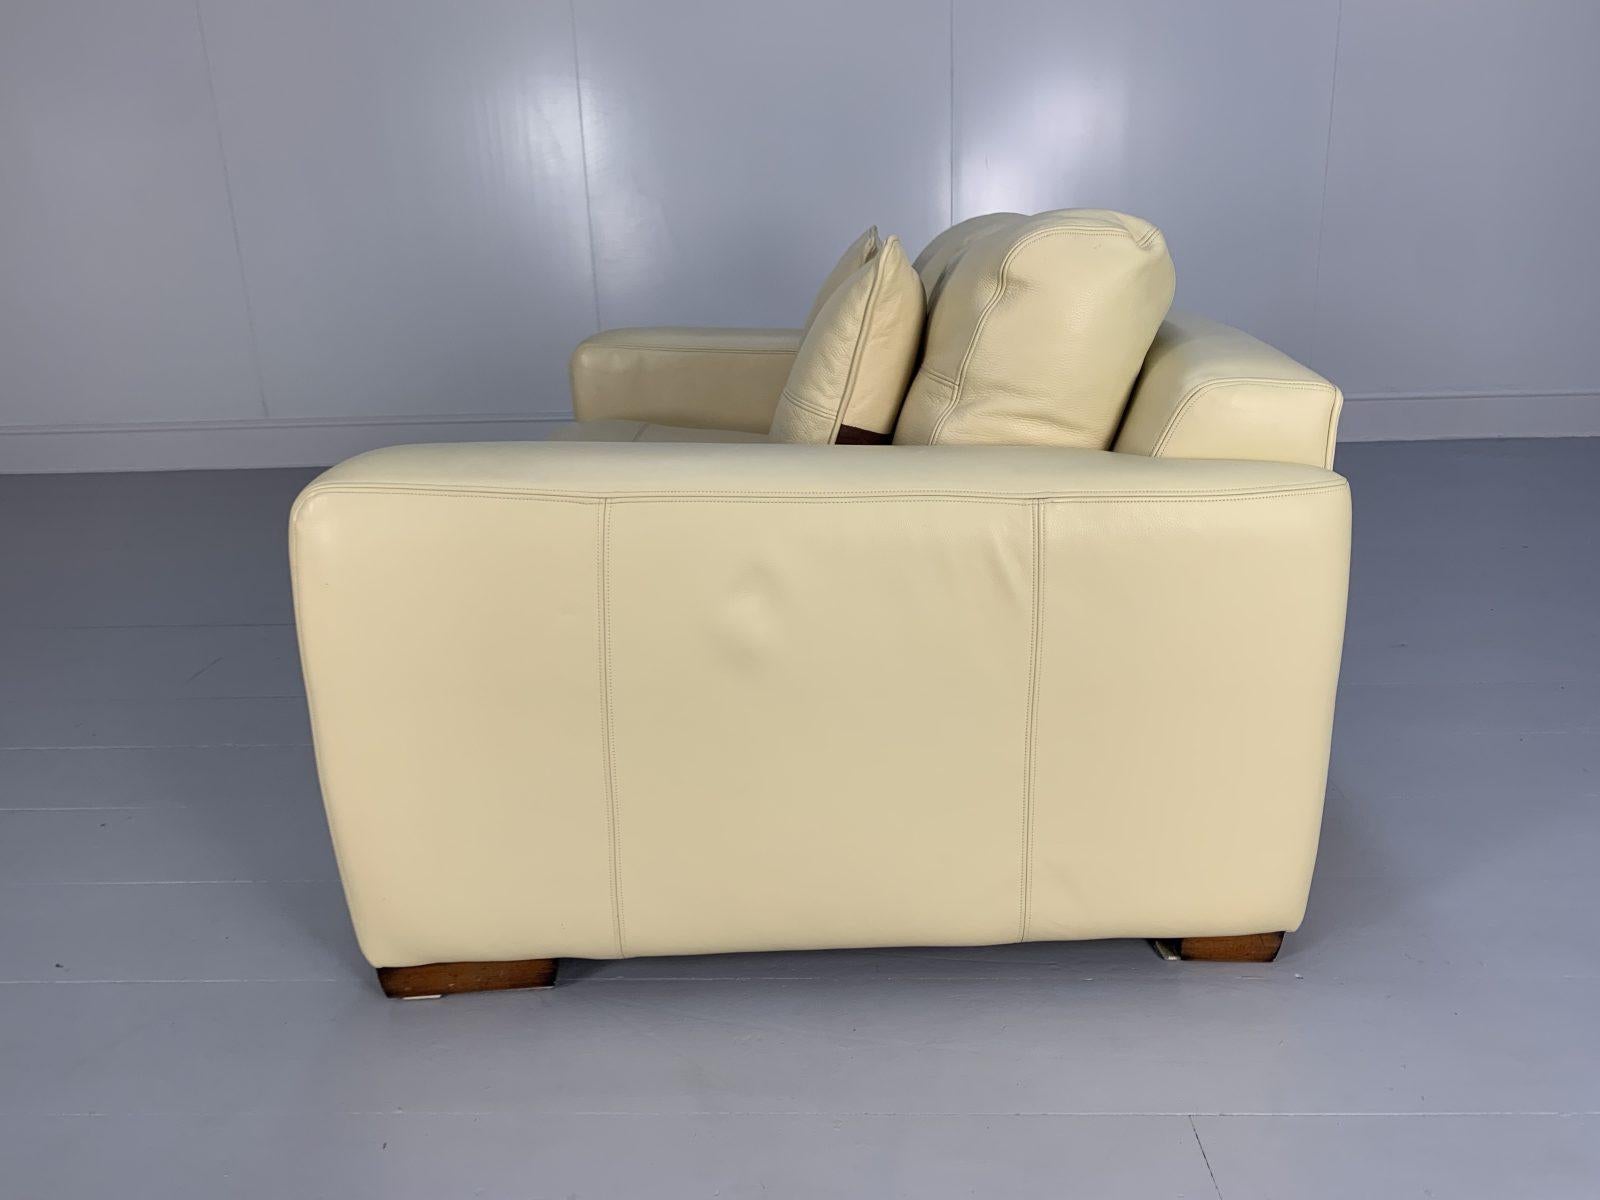 Duresta “Panther” 2-Seat Sofa – in Cream Leather In Good Condition For Sale In Barrowford, GB